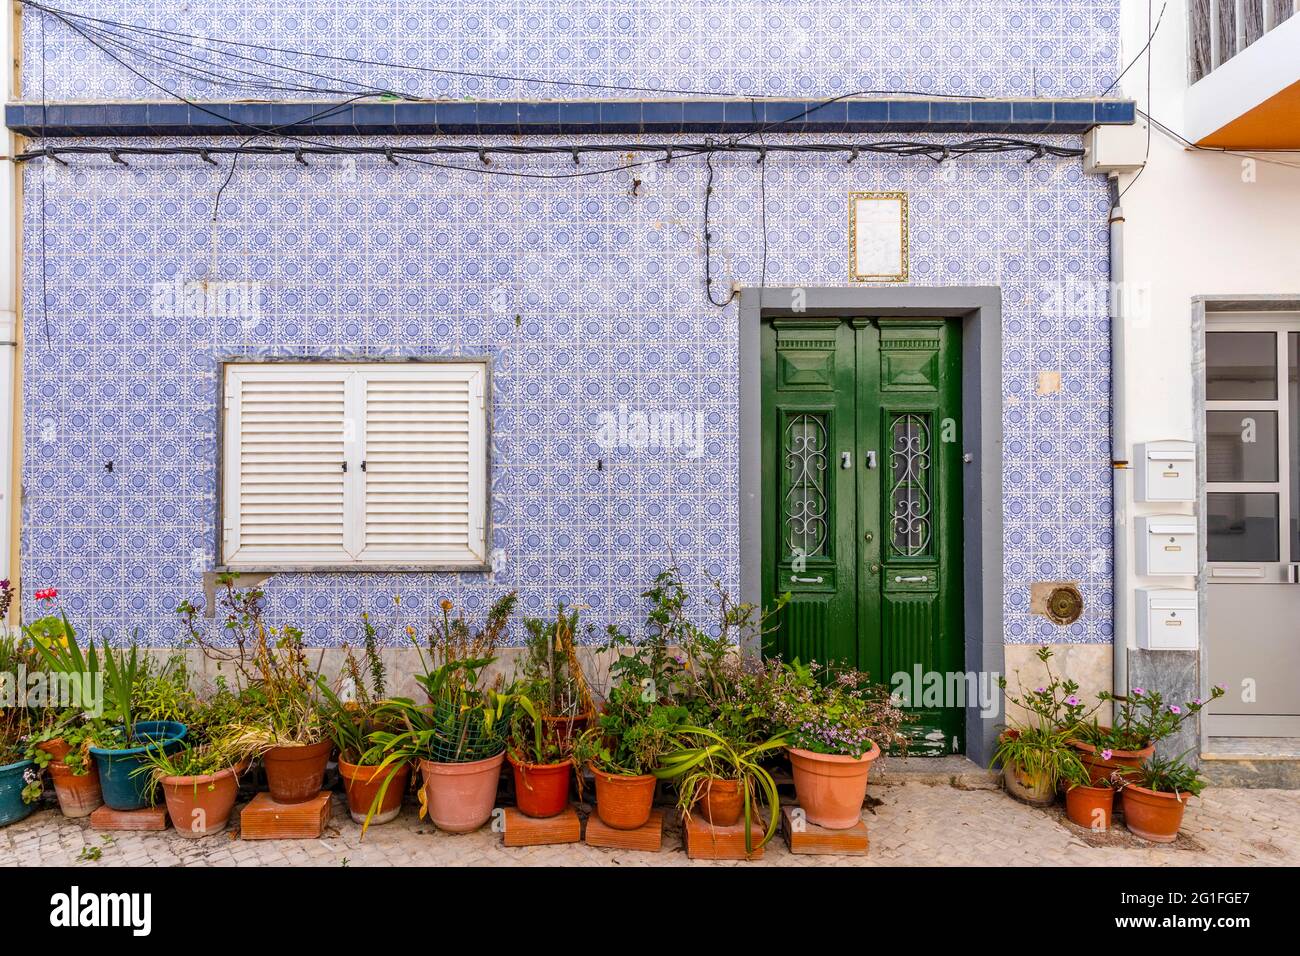 A house with traditional Portuguese tiles in Olhao, Algarve, Portugal Stock Photo